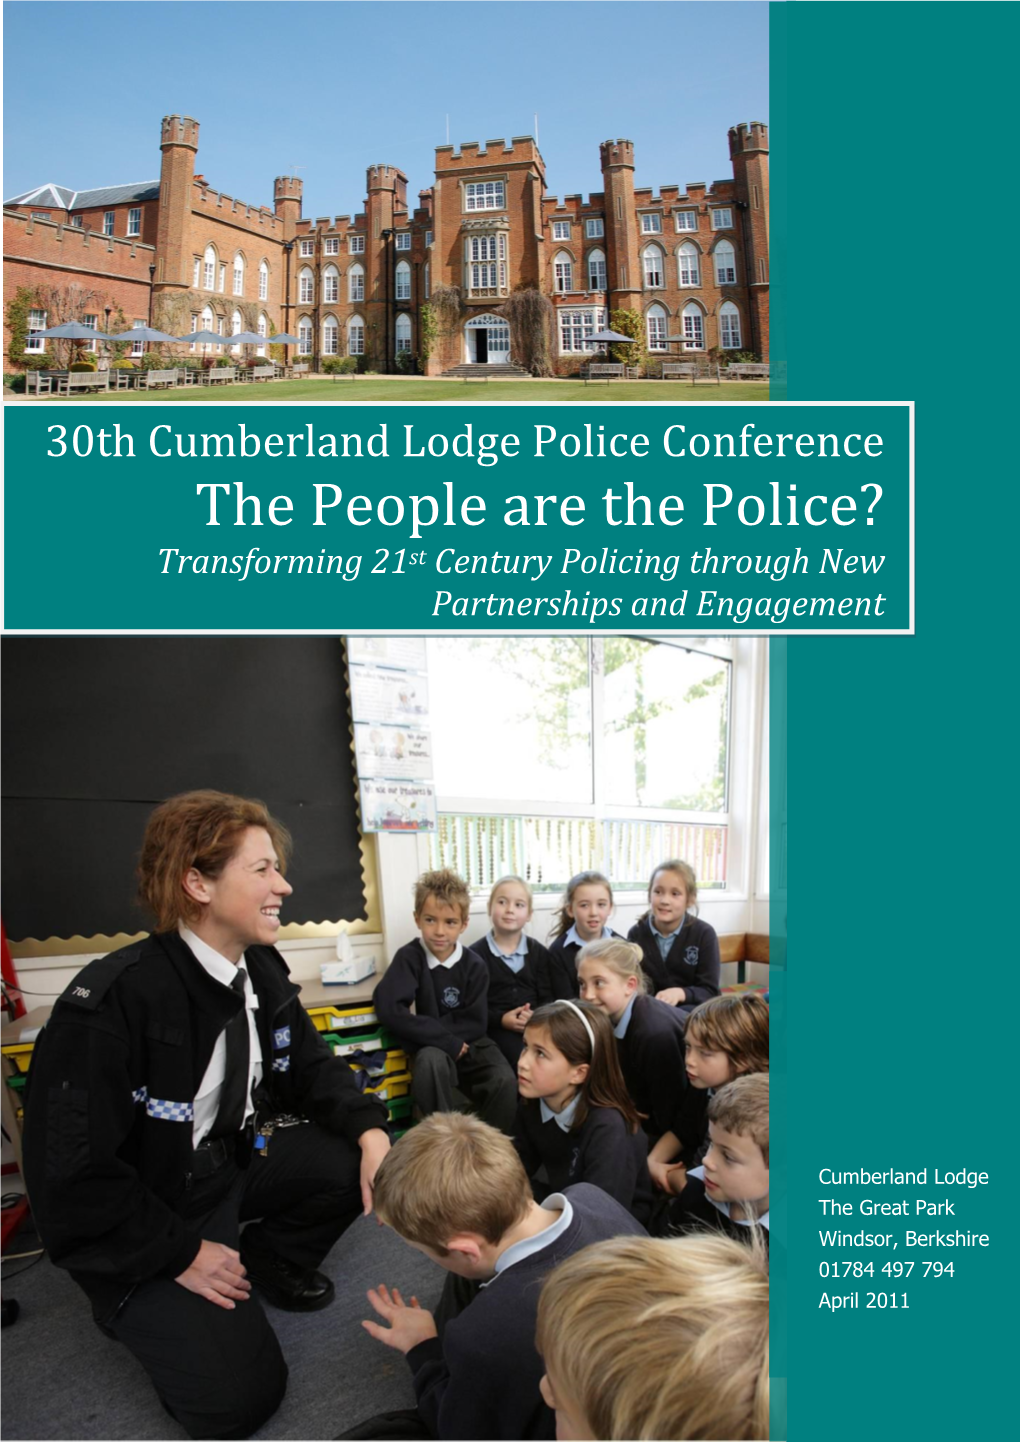 30Th Cumberland Lodge Police Conference the People Are the Police? Transforming 21St Century Policing Through New Partnerships and Engagement